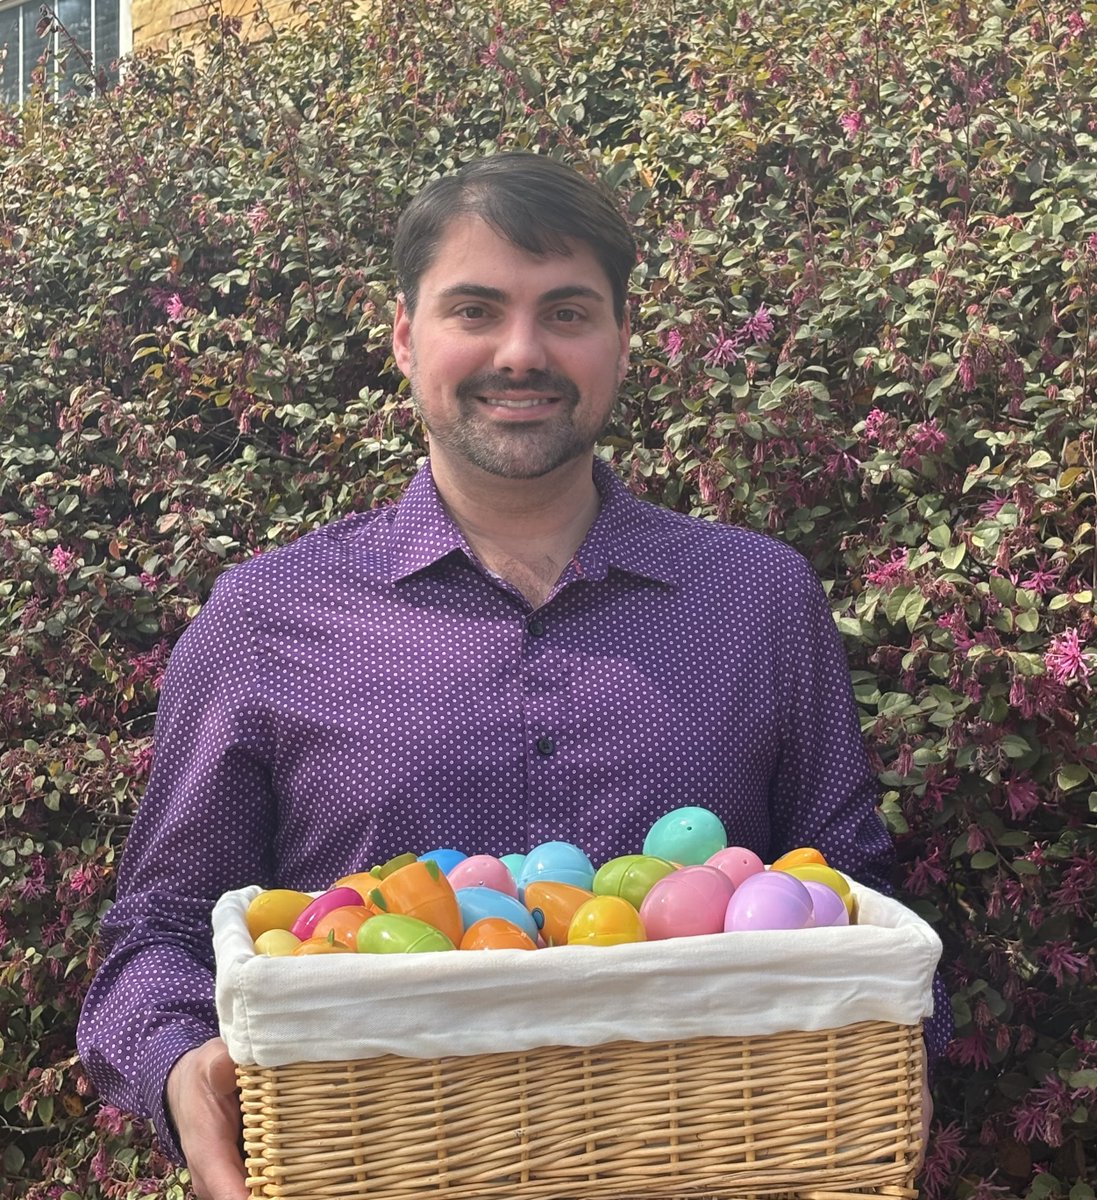 Come see Ben to fill up your baskets with eggs! From 11-4 while supplies last. Can’t wait to see you all!!
.
.
.
#easter #celebrate #candy #eggs #somersetatmadison #madisonal